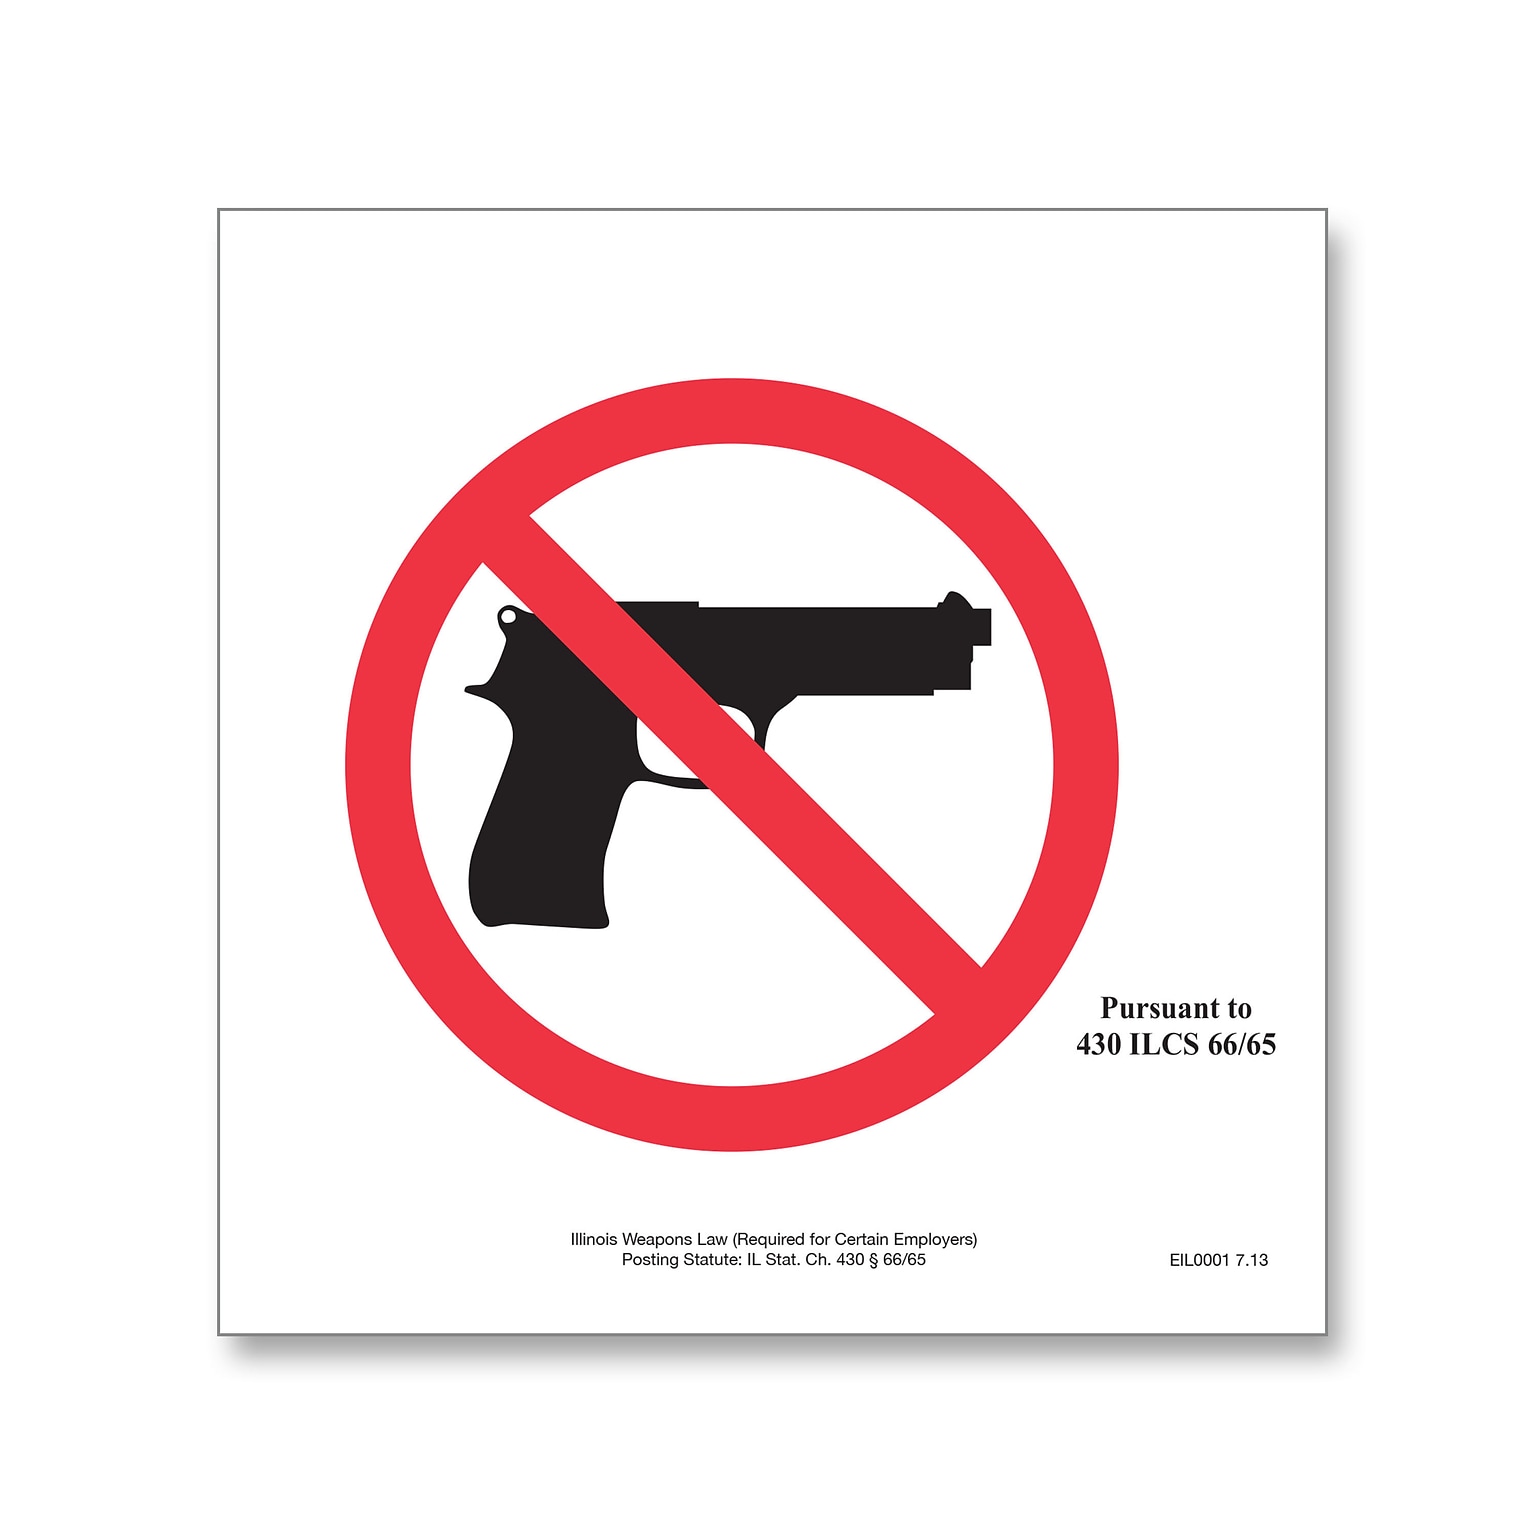 ComplyRight Weapons Law Poster Service, District of Columbia (U1200CWPDC)